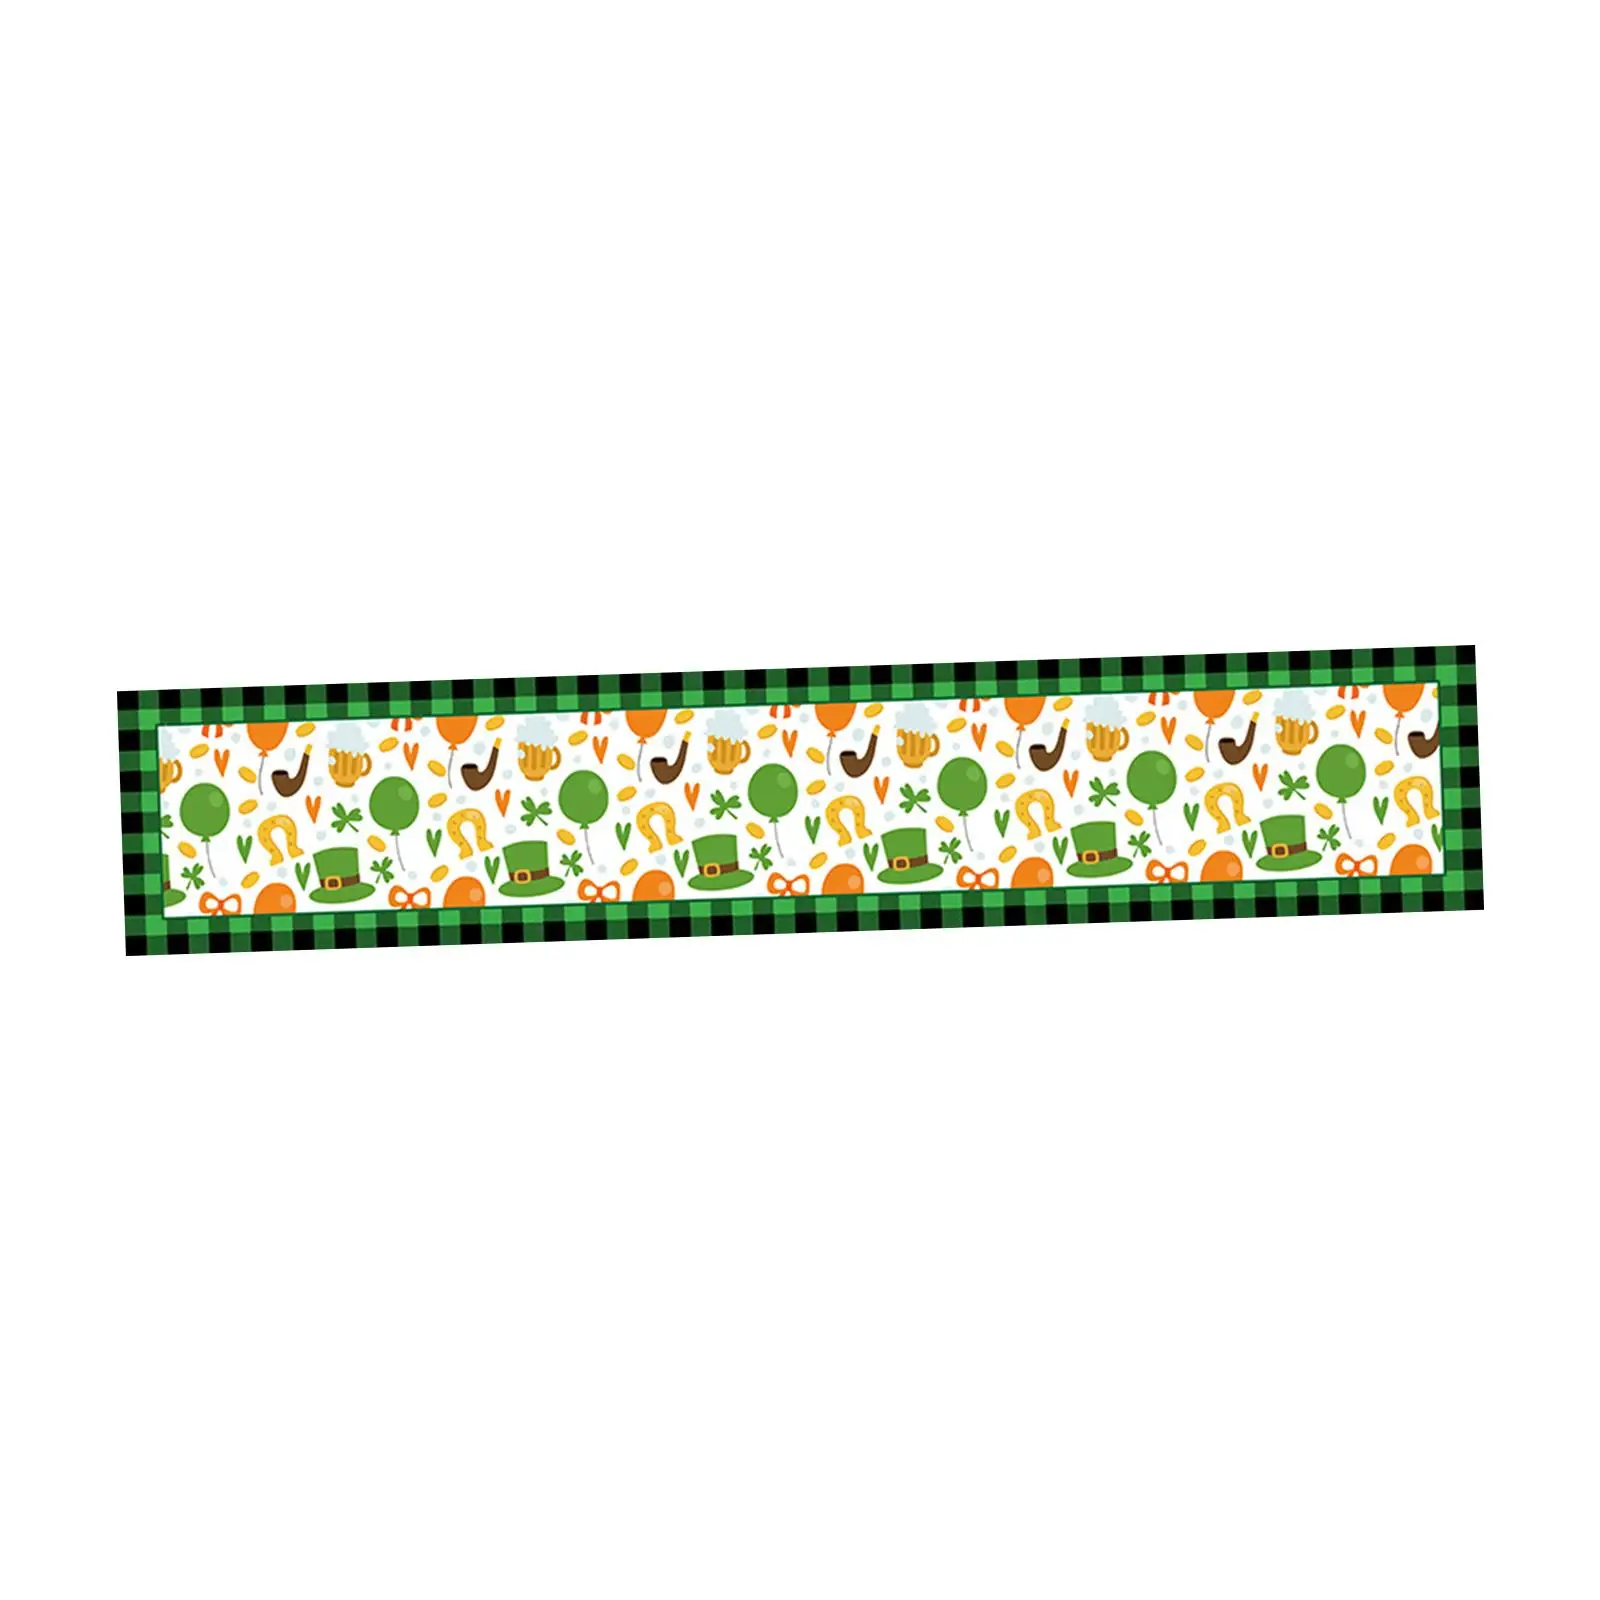 St.`s Day Table Linens, Spring Shamrocks Clovers, Table Runners, Tablecloths